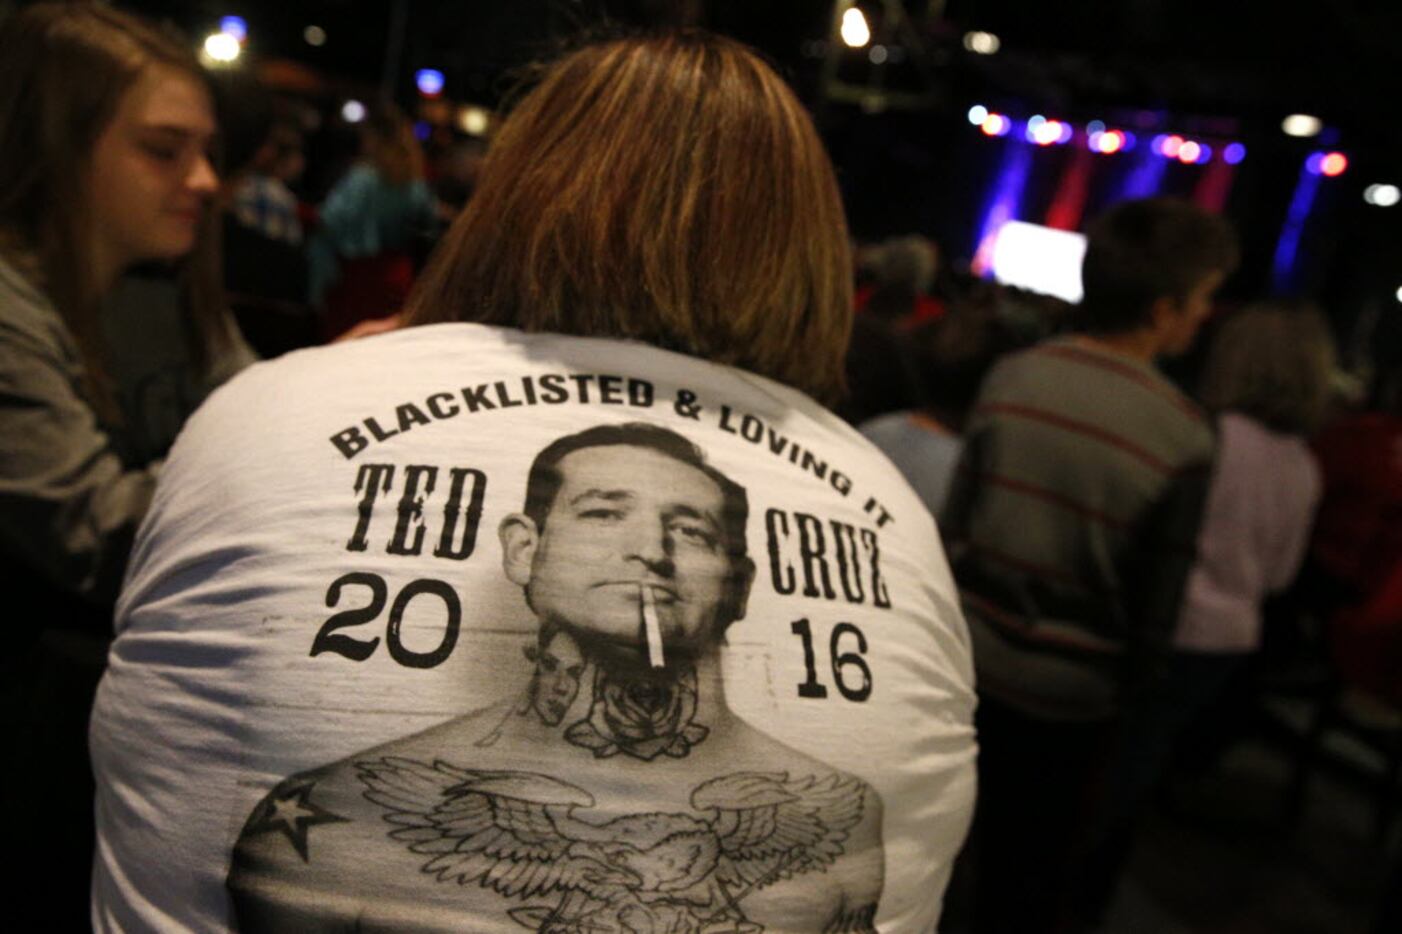 Shirts like this one, from Ted Cruz's presidential run in 2016, are fine to wear to rallies...